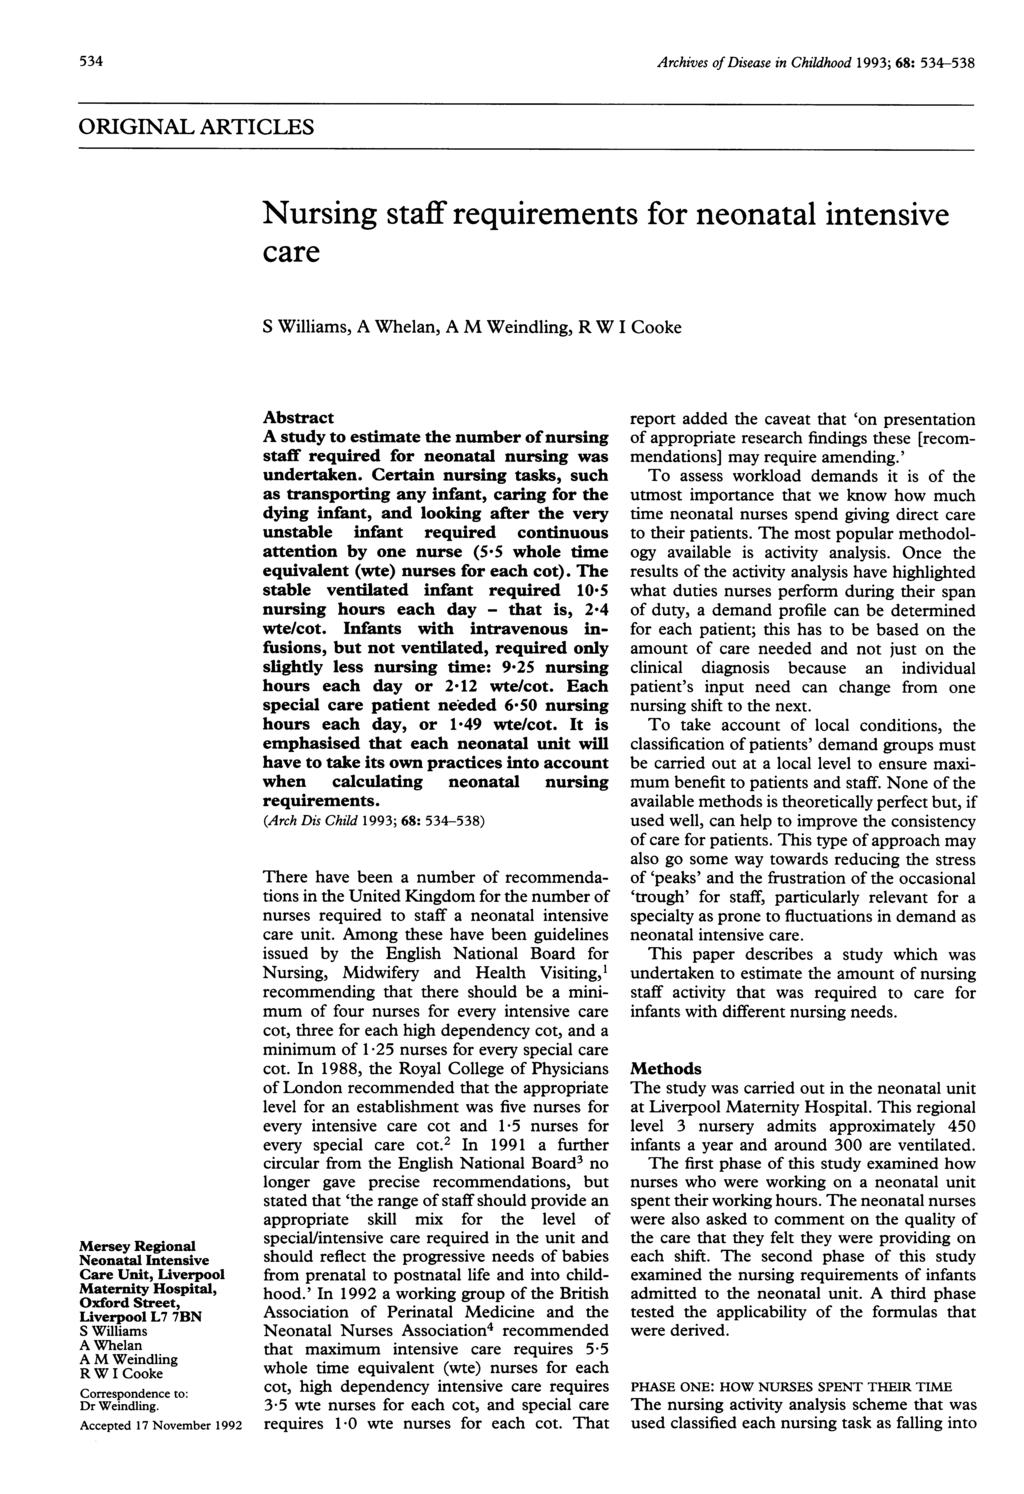 54 Archives of Disease in Childhood 199; 68: 54-58 ORIGINAL ARTICLES Mersey Regional Neonatal Intensive Care Unit, Liverpool Maternity Hospital, Oxford Street, Liverpool L7 7BN S Williams A Whelan A